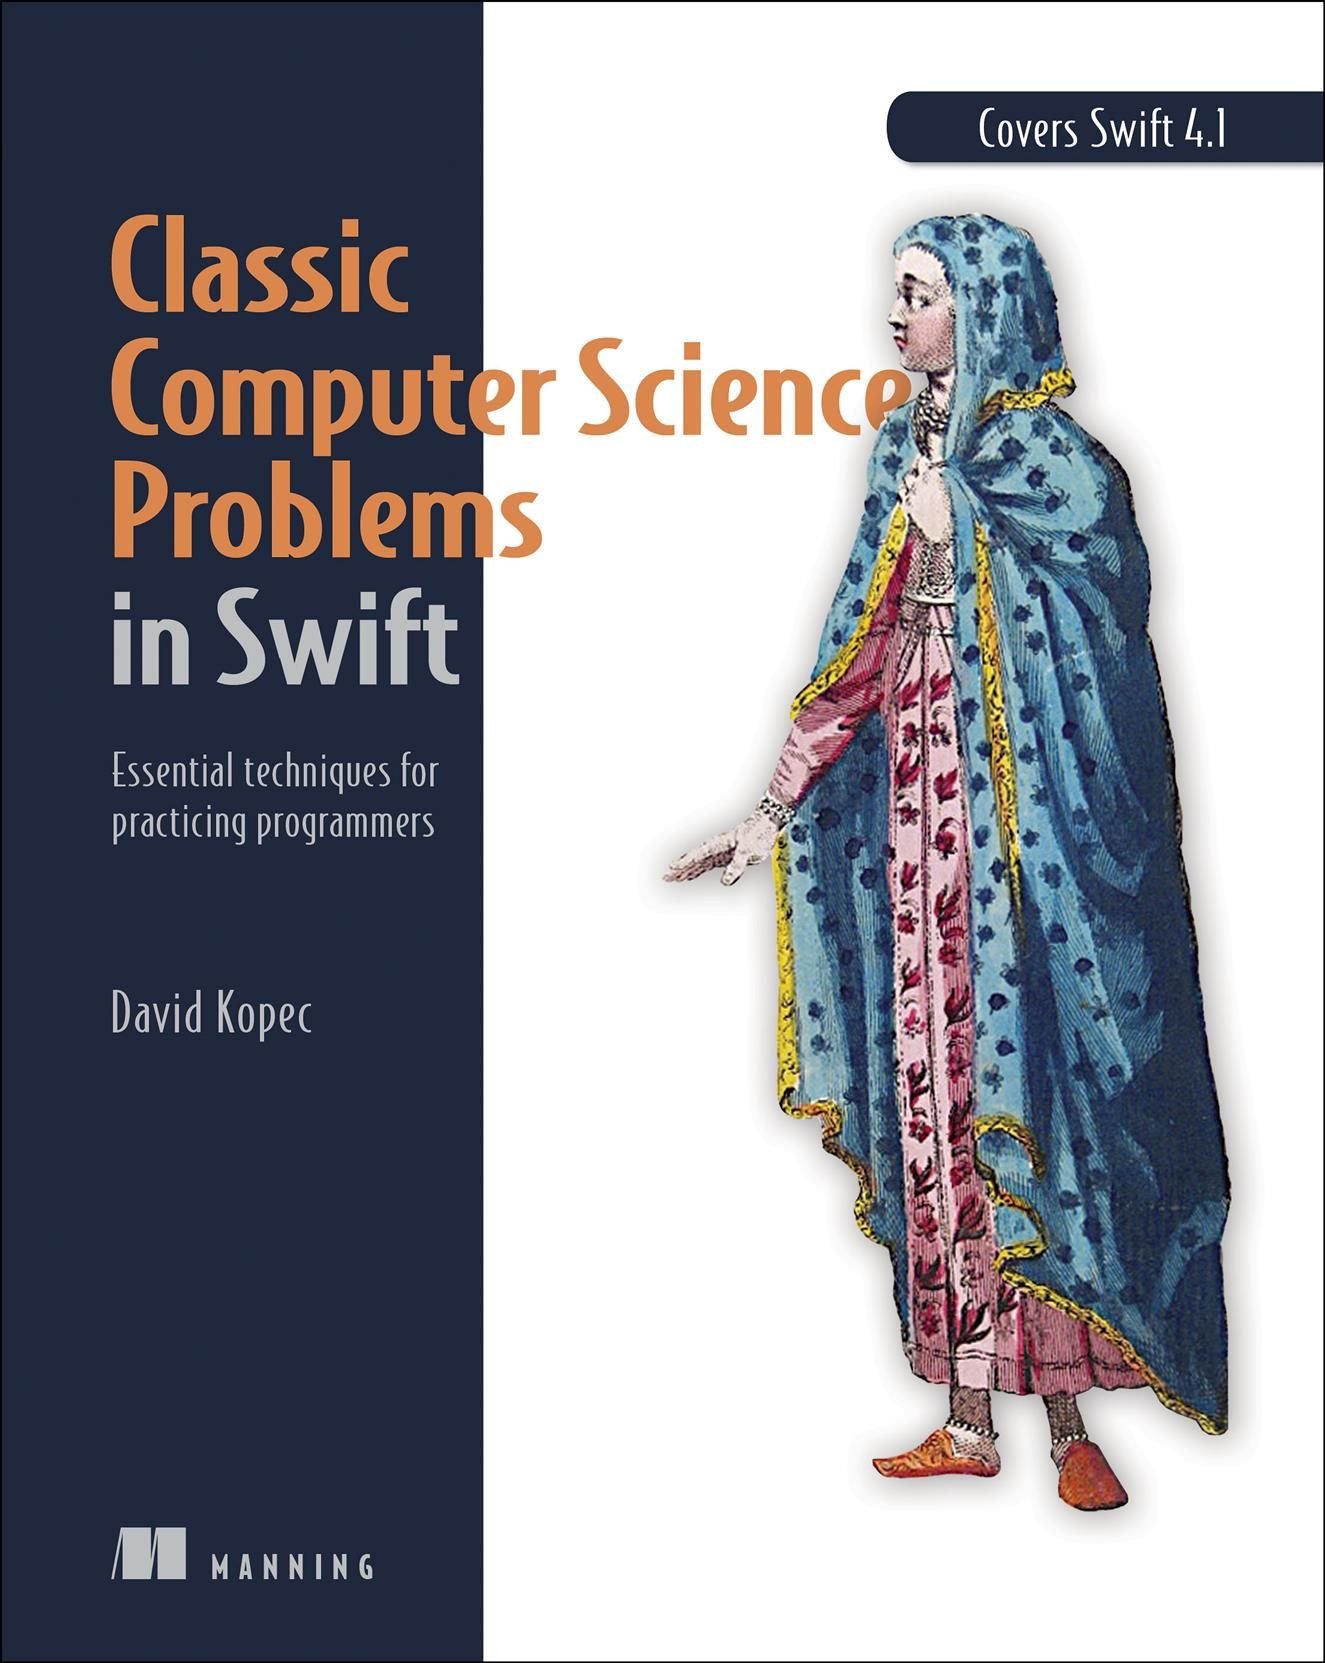 Classic Computer Science Problems in Swift